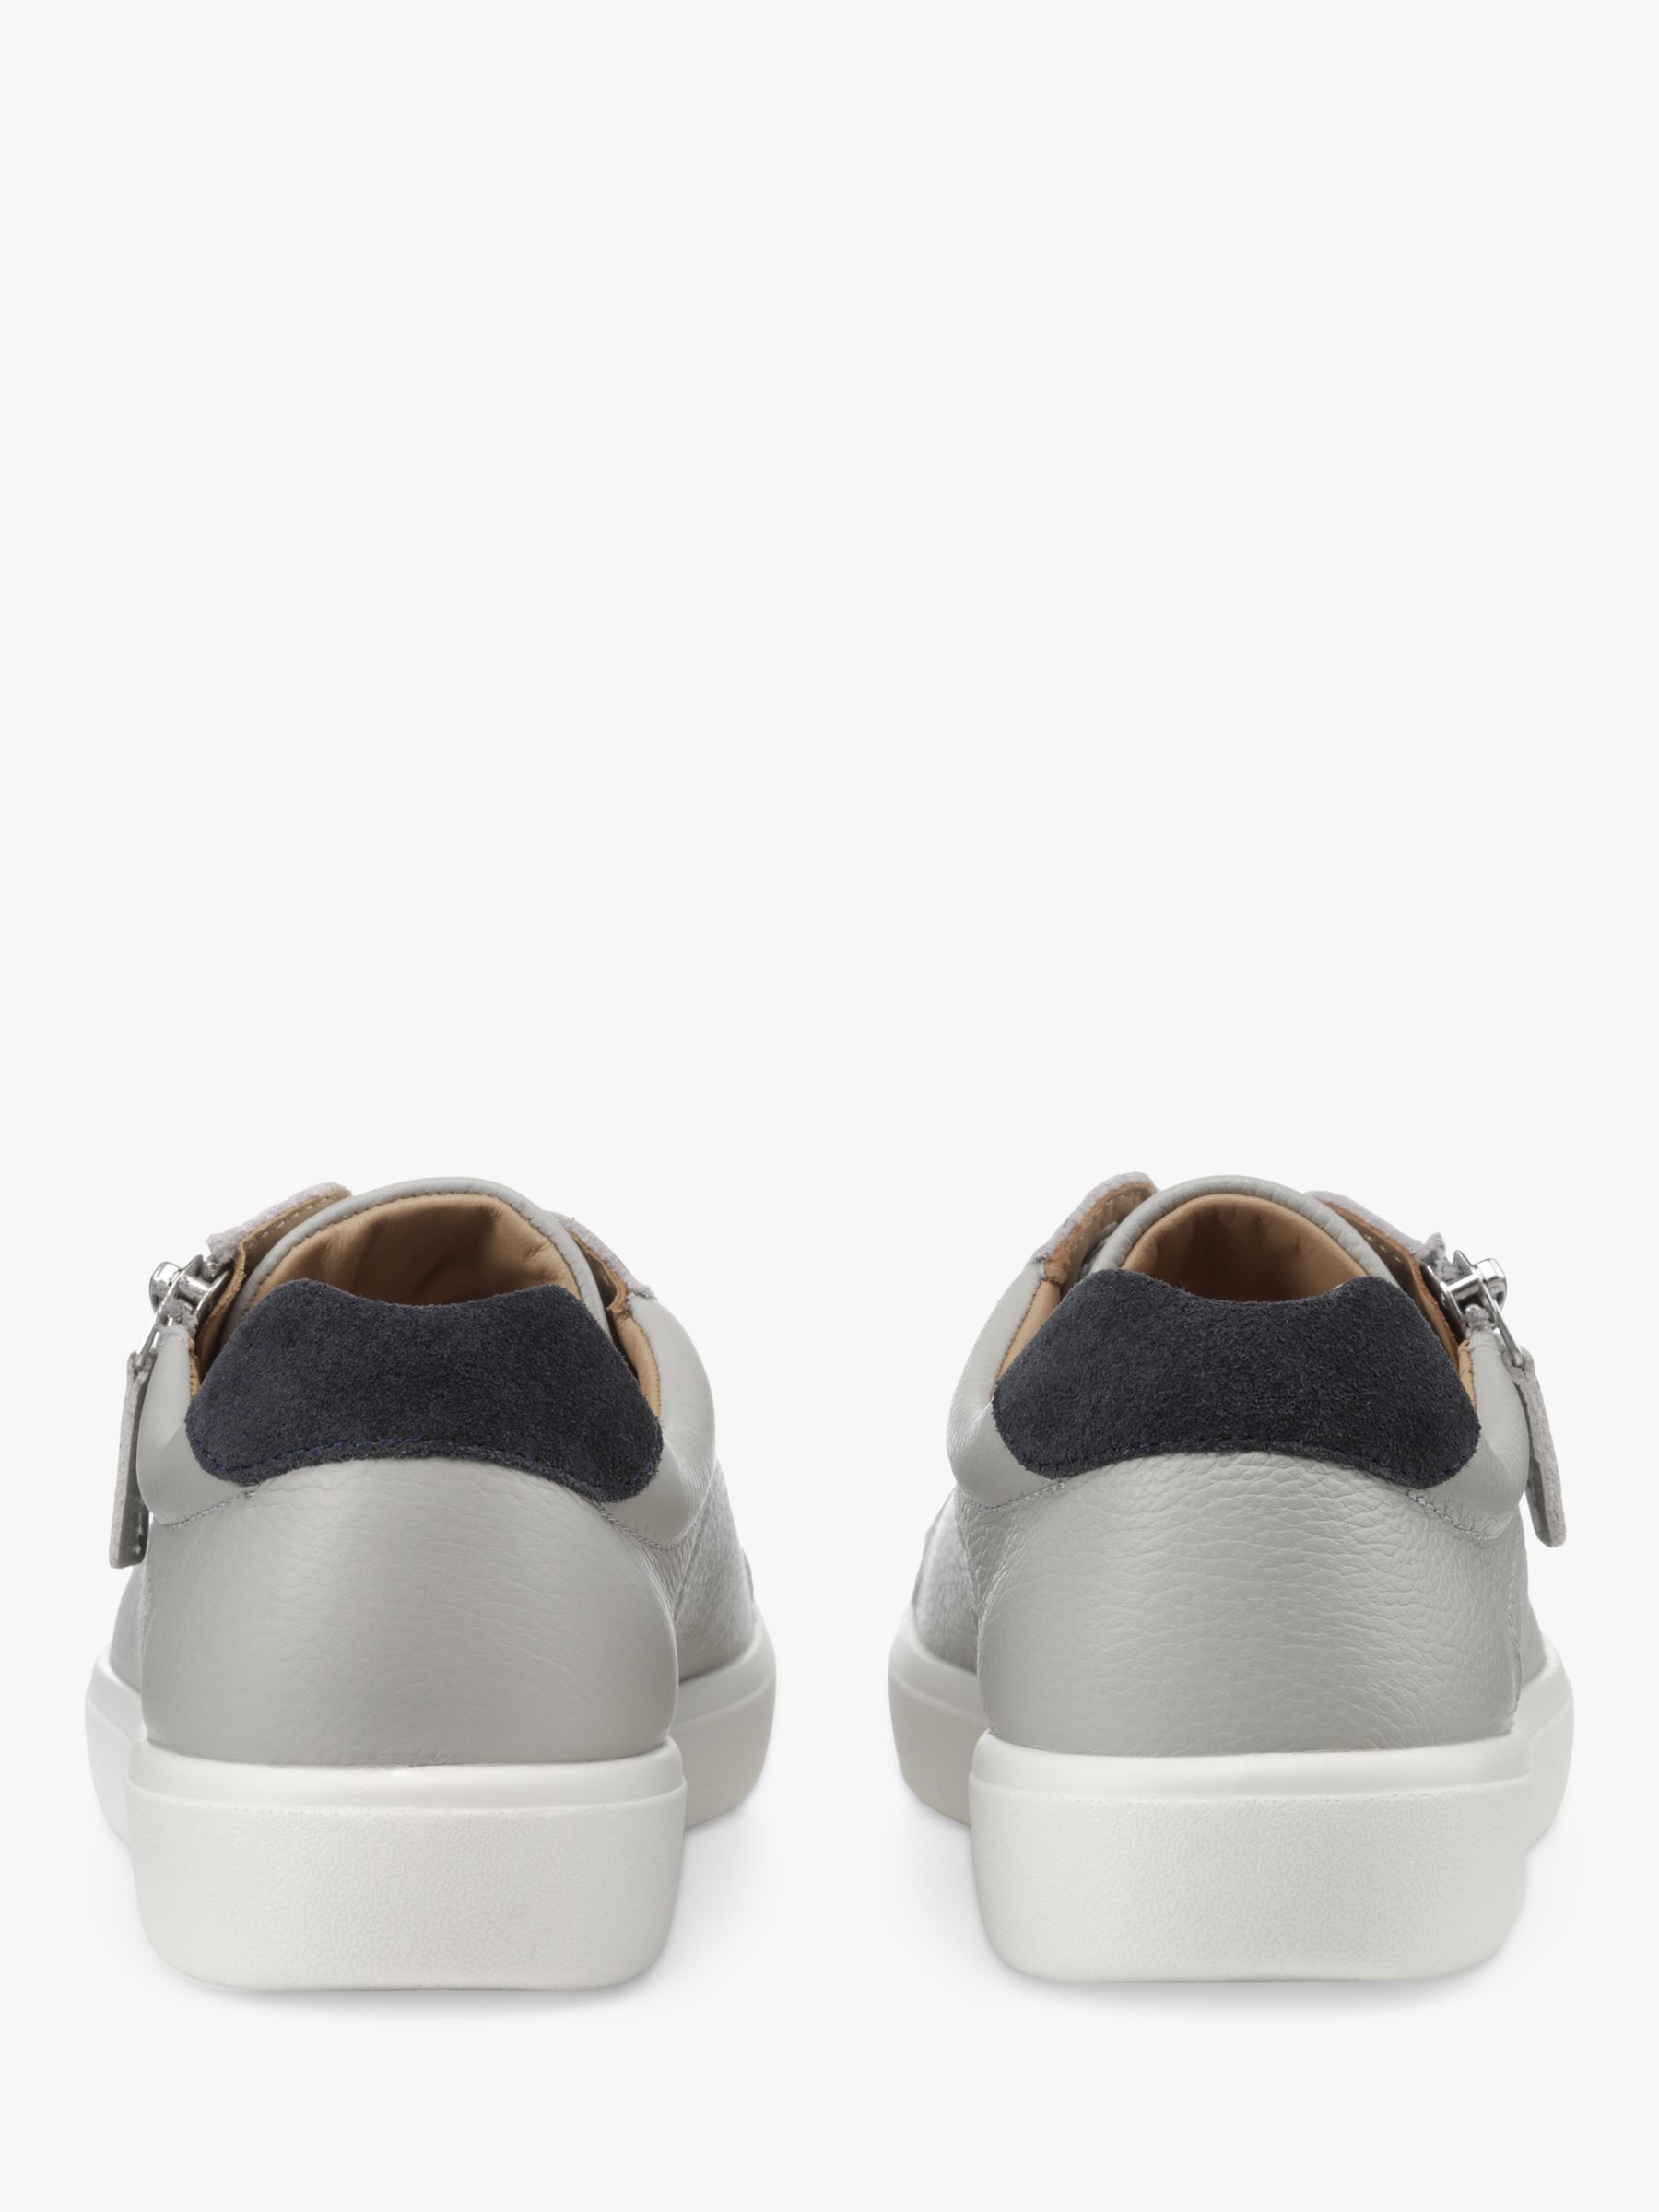 Buy Hotter Chase II Leather Zip and Go Trainers Online at johnlewis.com